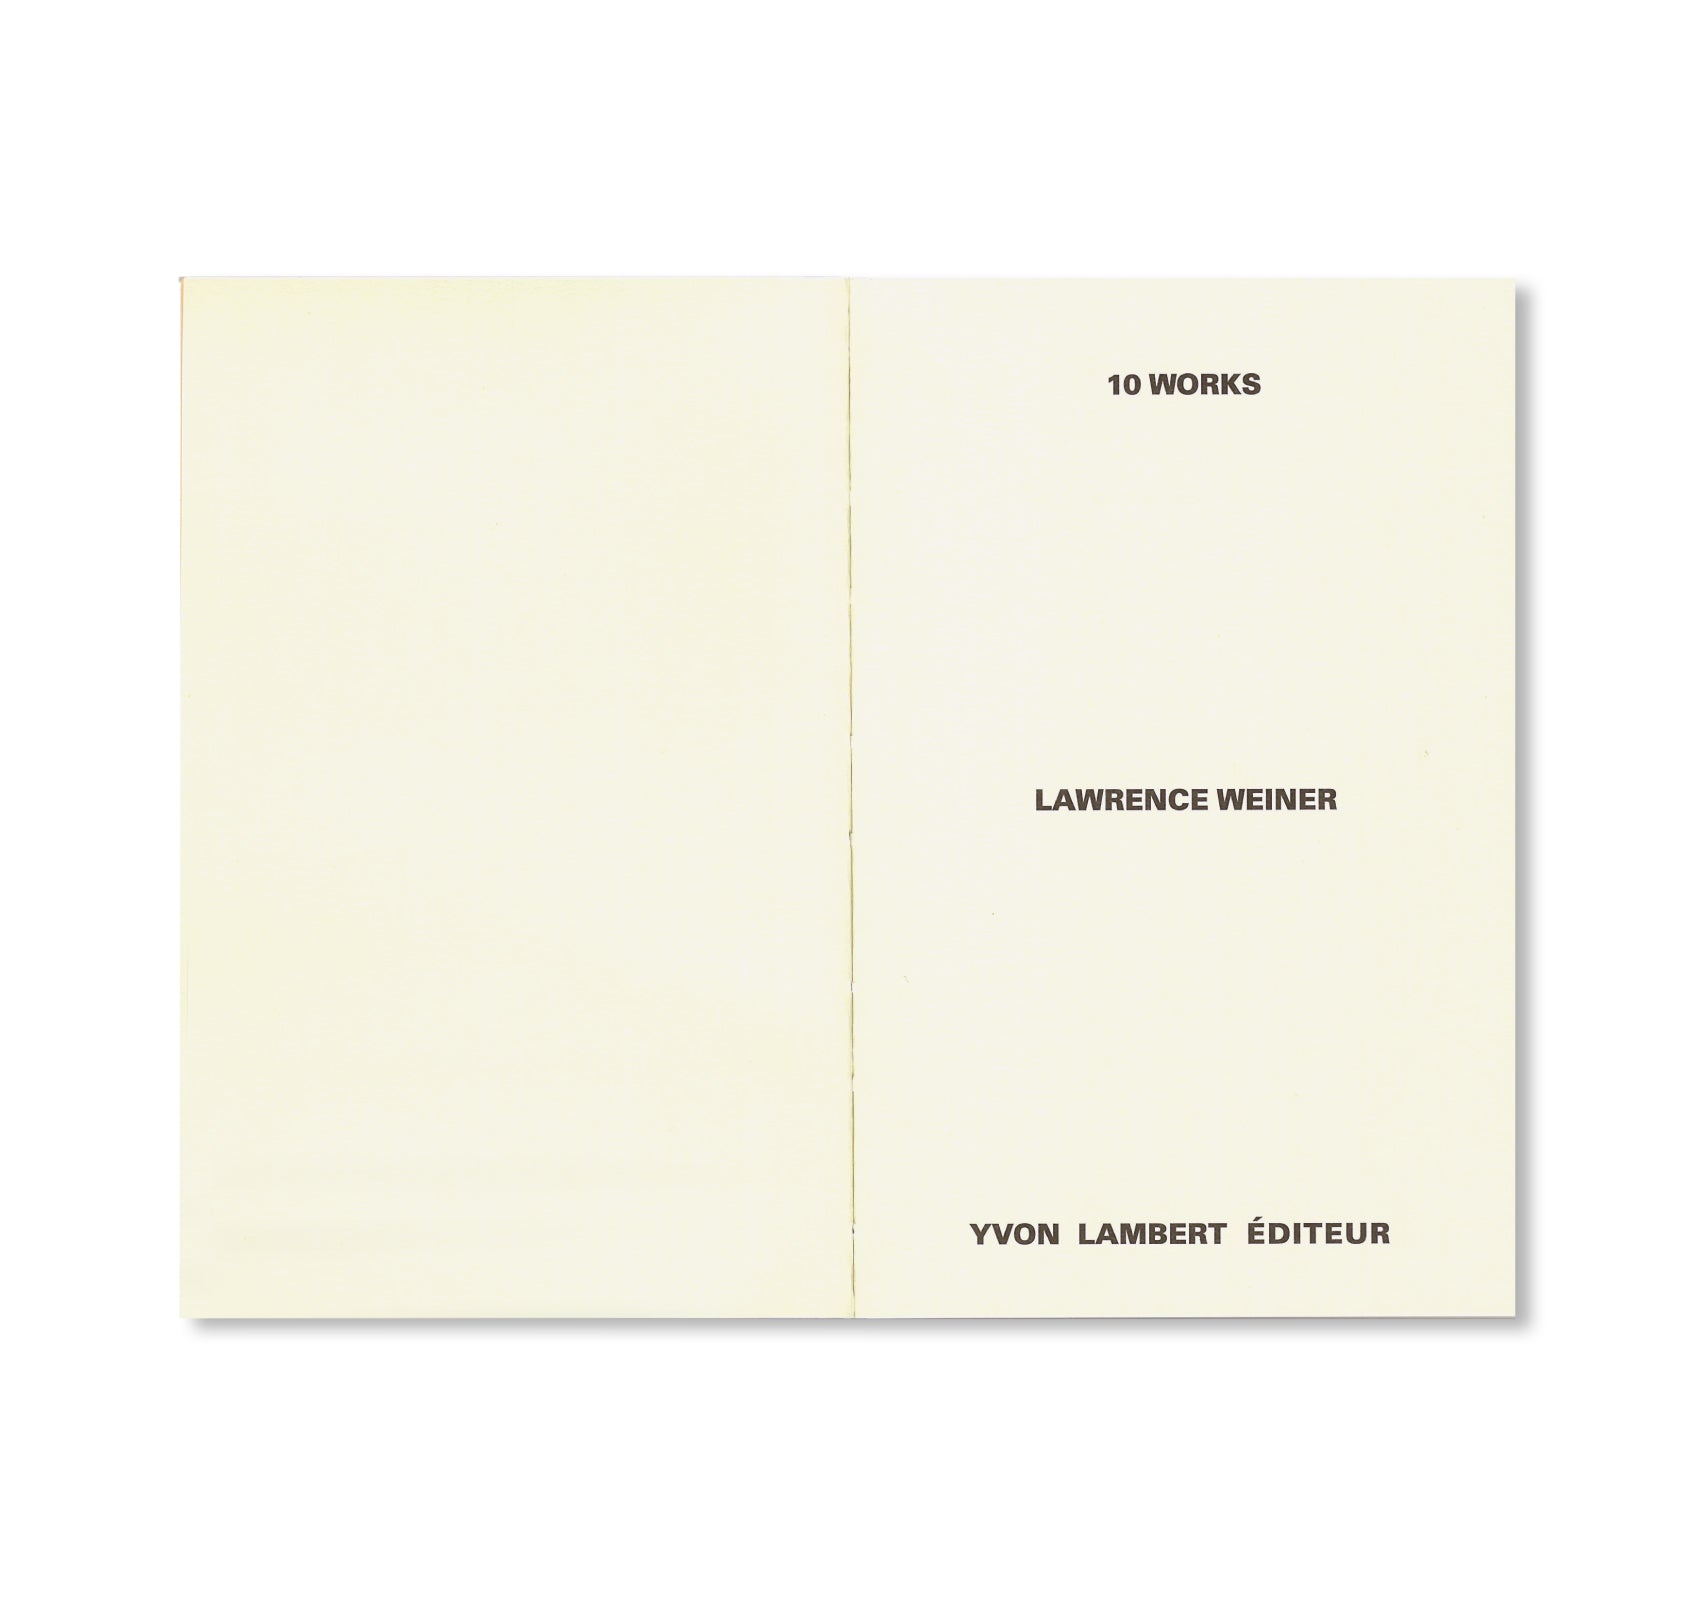 10 WORKS by Lawrence Weiner